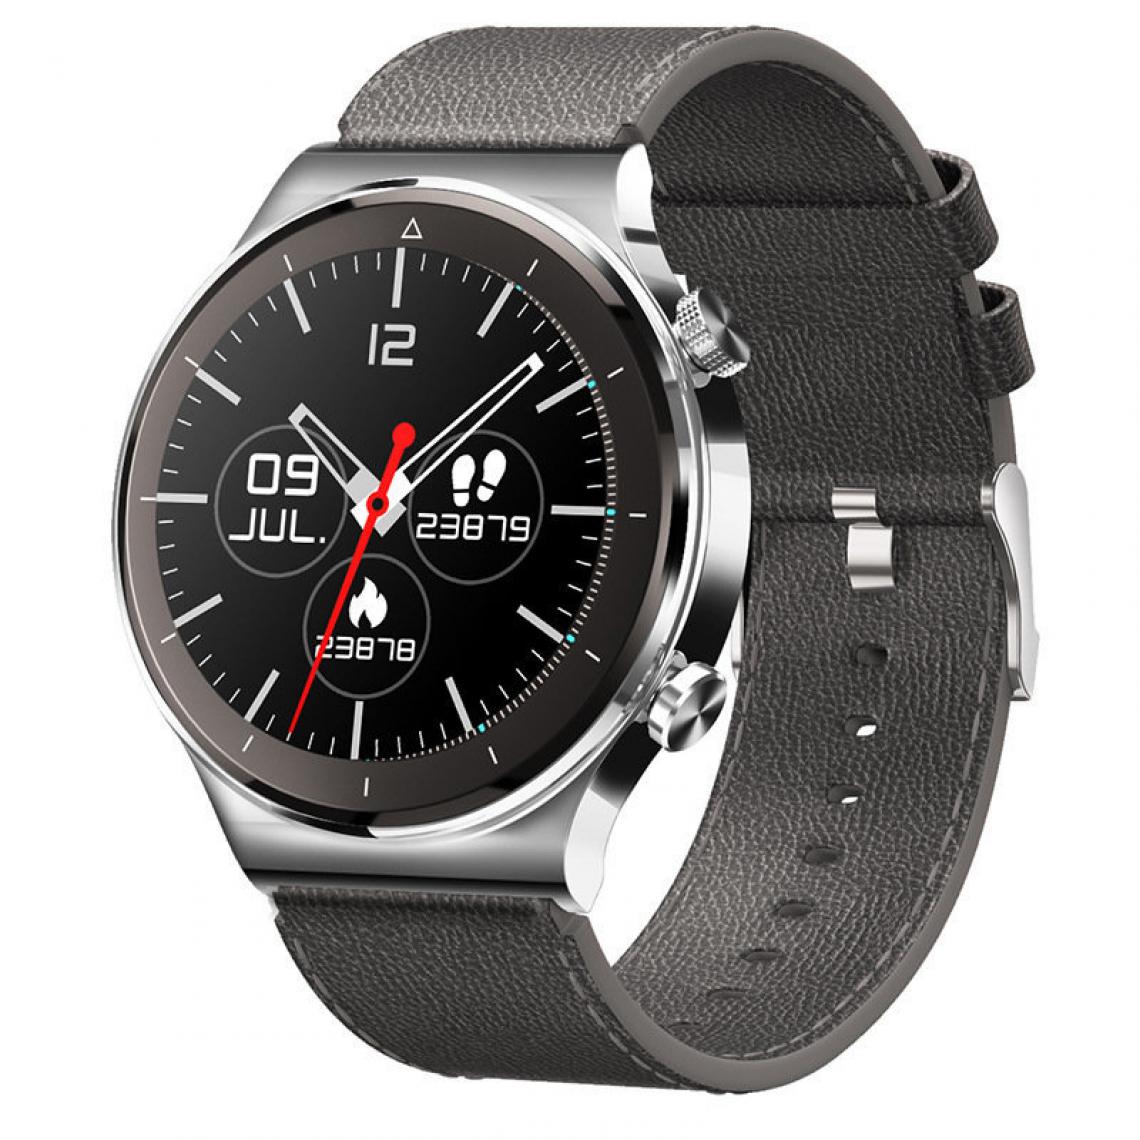 Chronotech Montres - Chronus Smart Watch, Full Touch Screen Fitness Tracker Sports with Voice Control, Bluetooth Call(silver) - Montre connectée